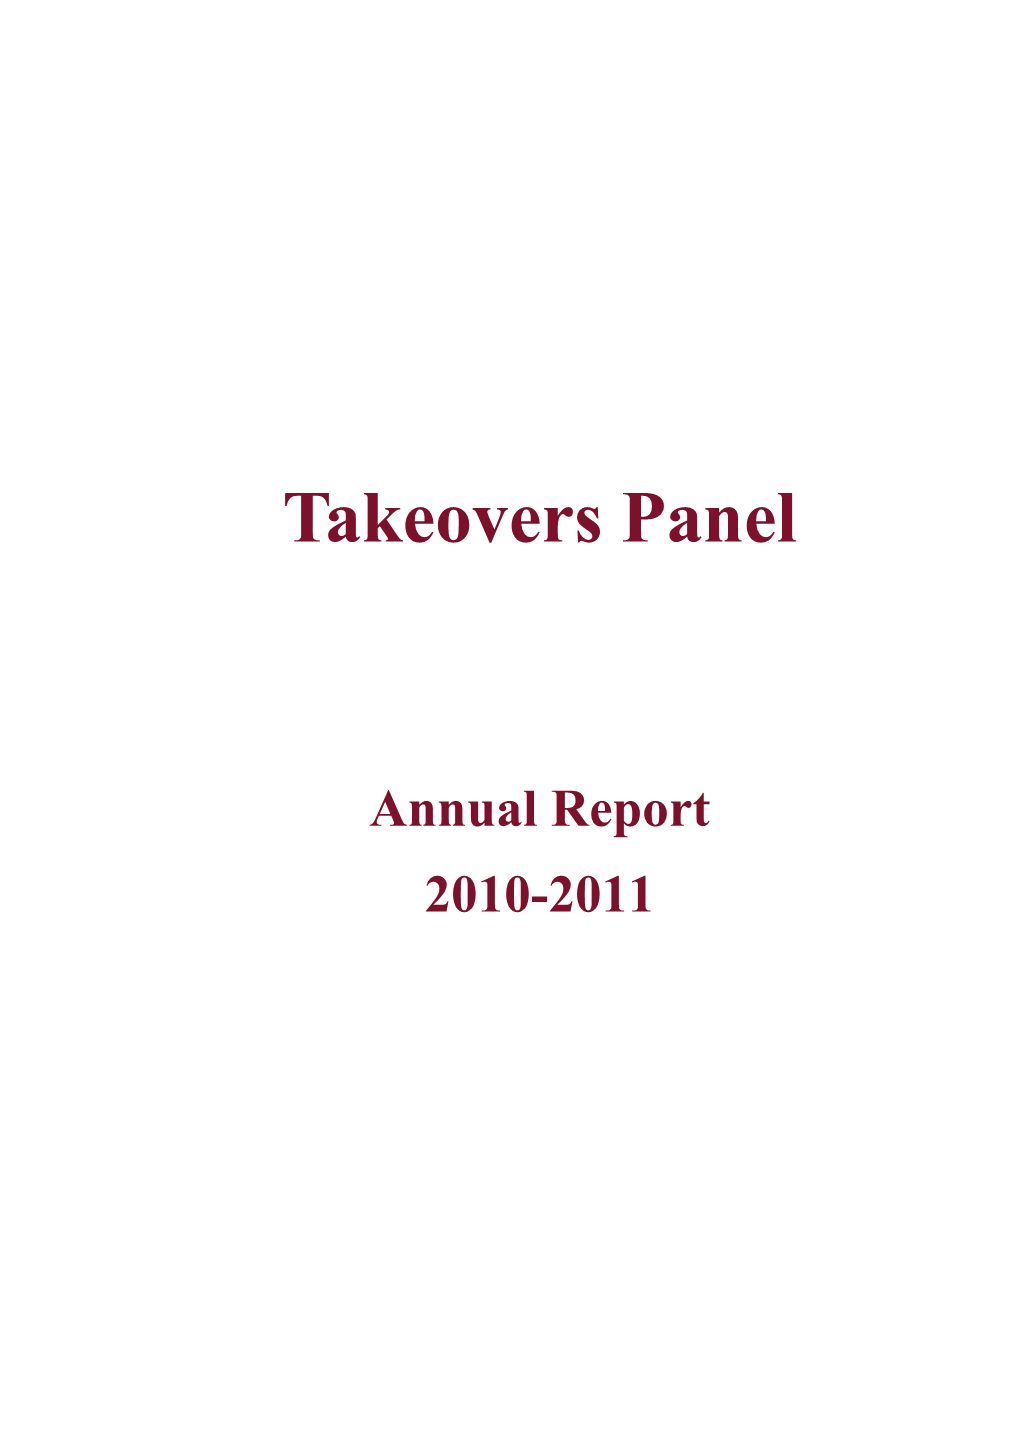 Takeovers Panel Annual Report 2010-2011